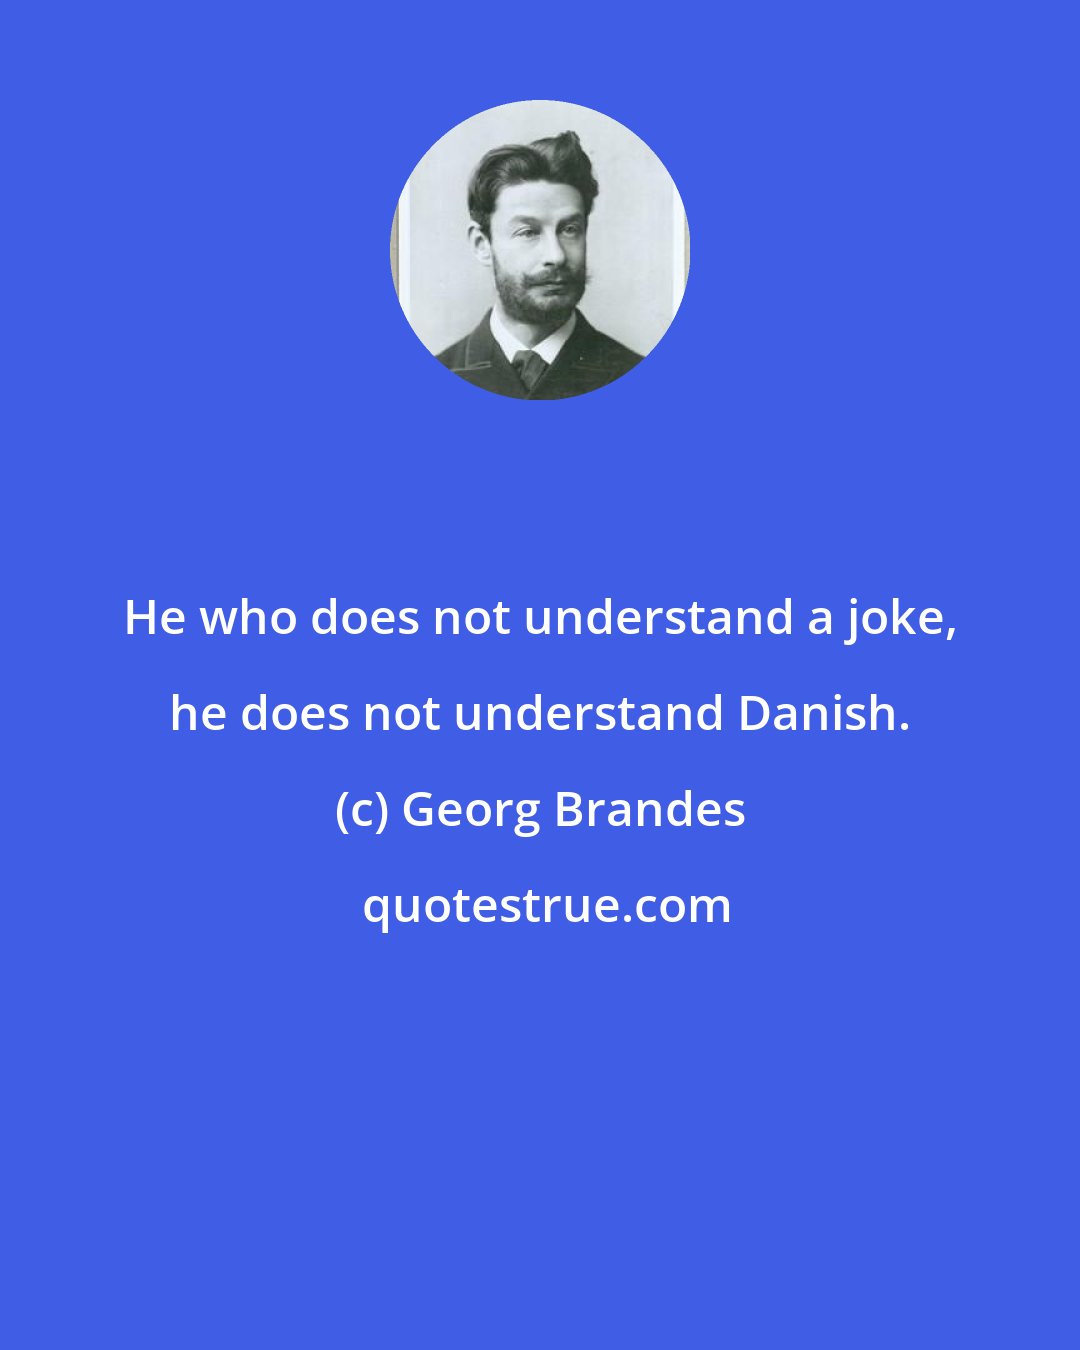 Georg Brandes: He who does not understand a joke, he does not understand Danish.